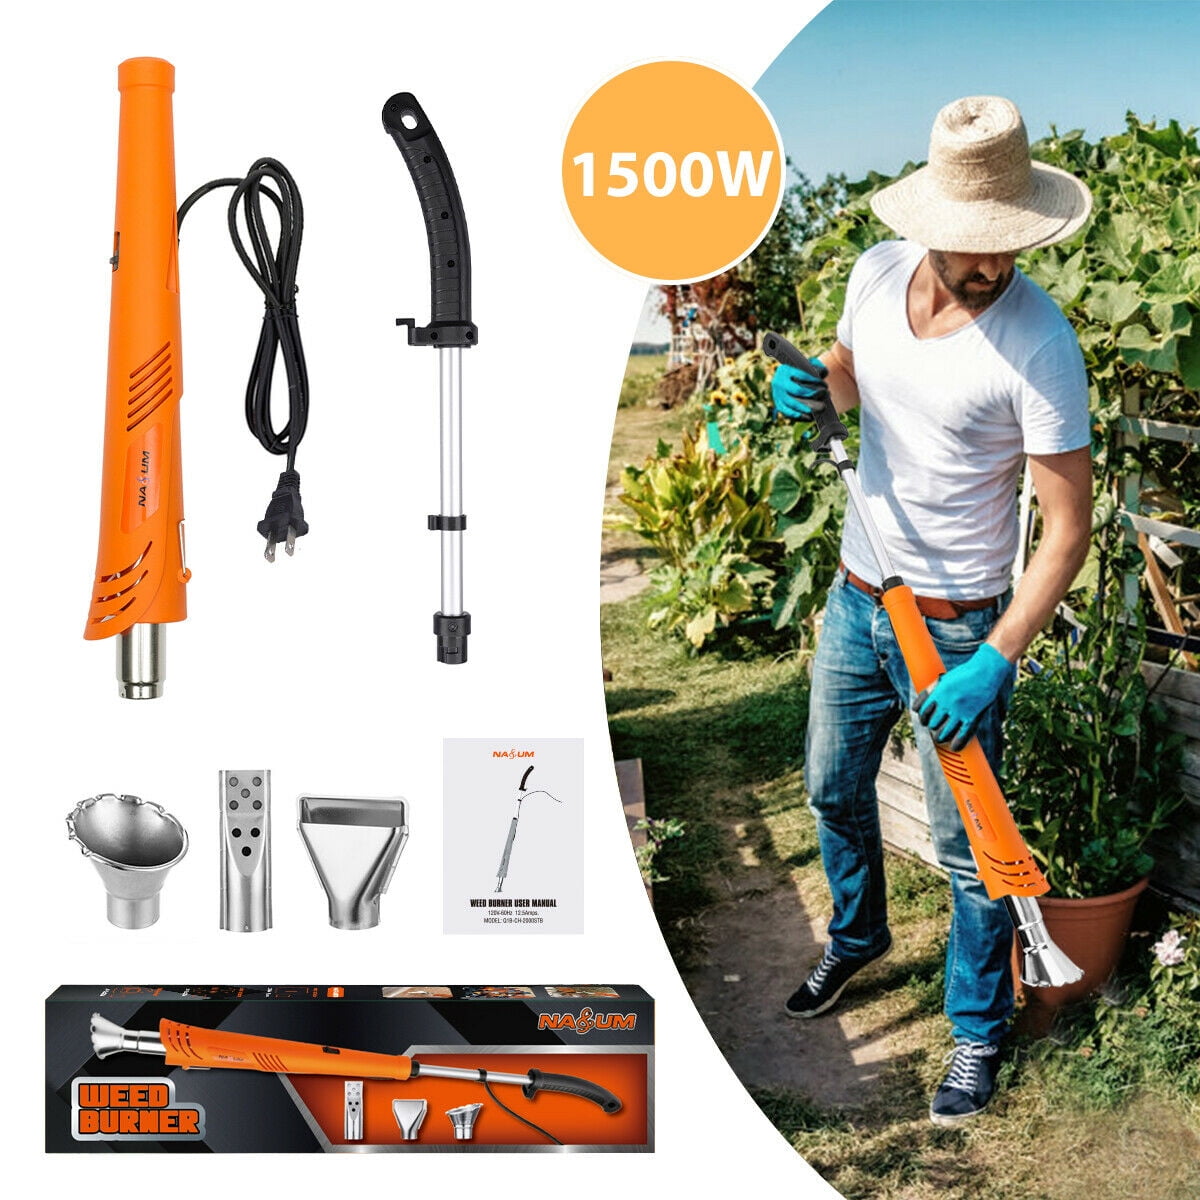 Details about   Patio Weed Burner Electric Weed Killer Thermal Weeding Stick 2000W Up to 650°C 